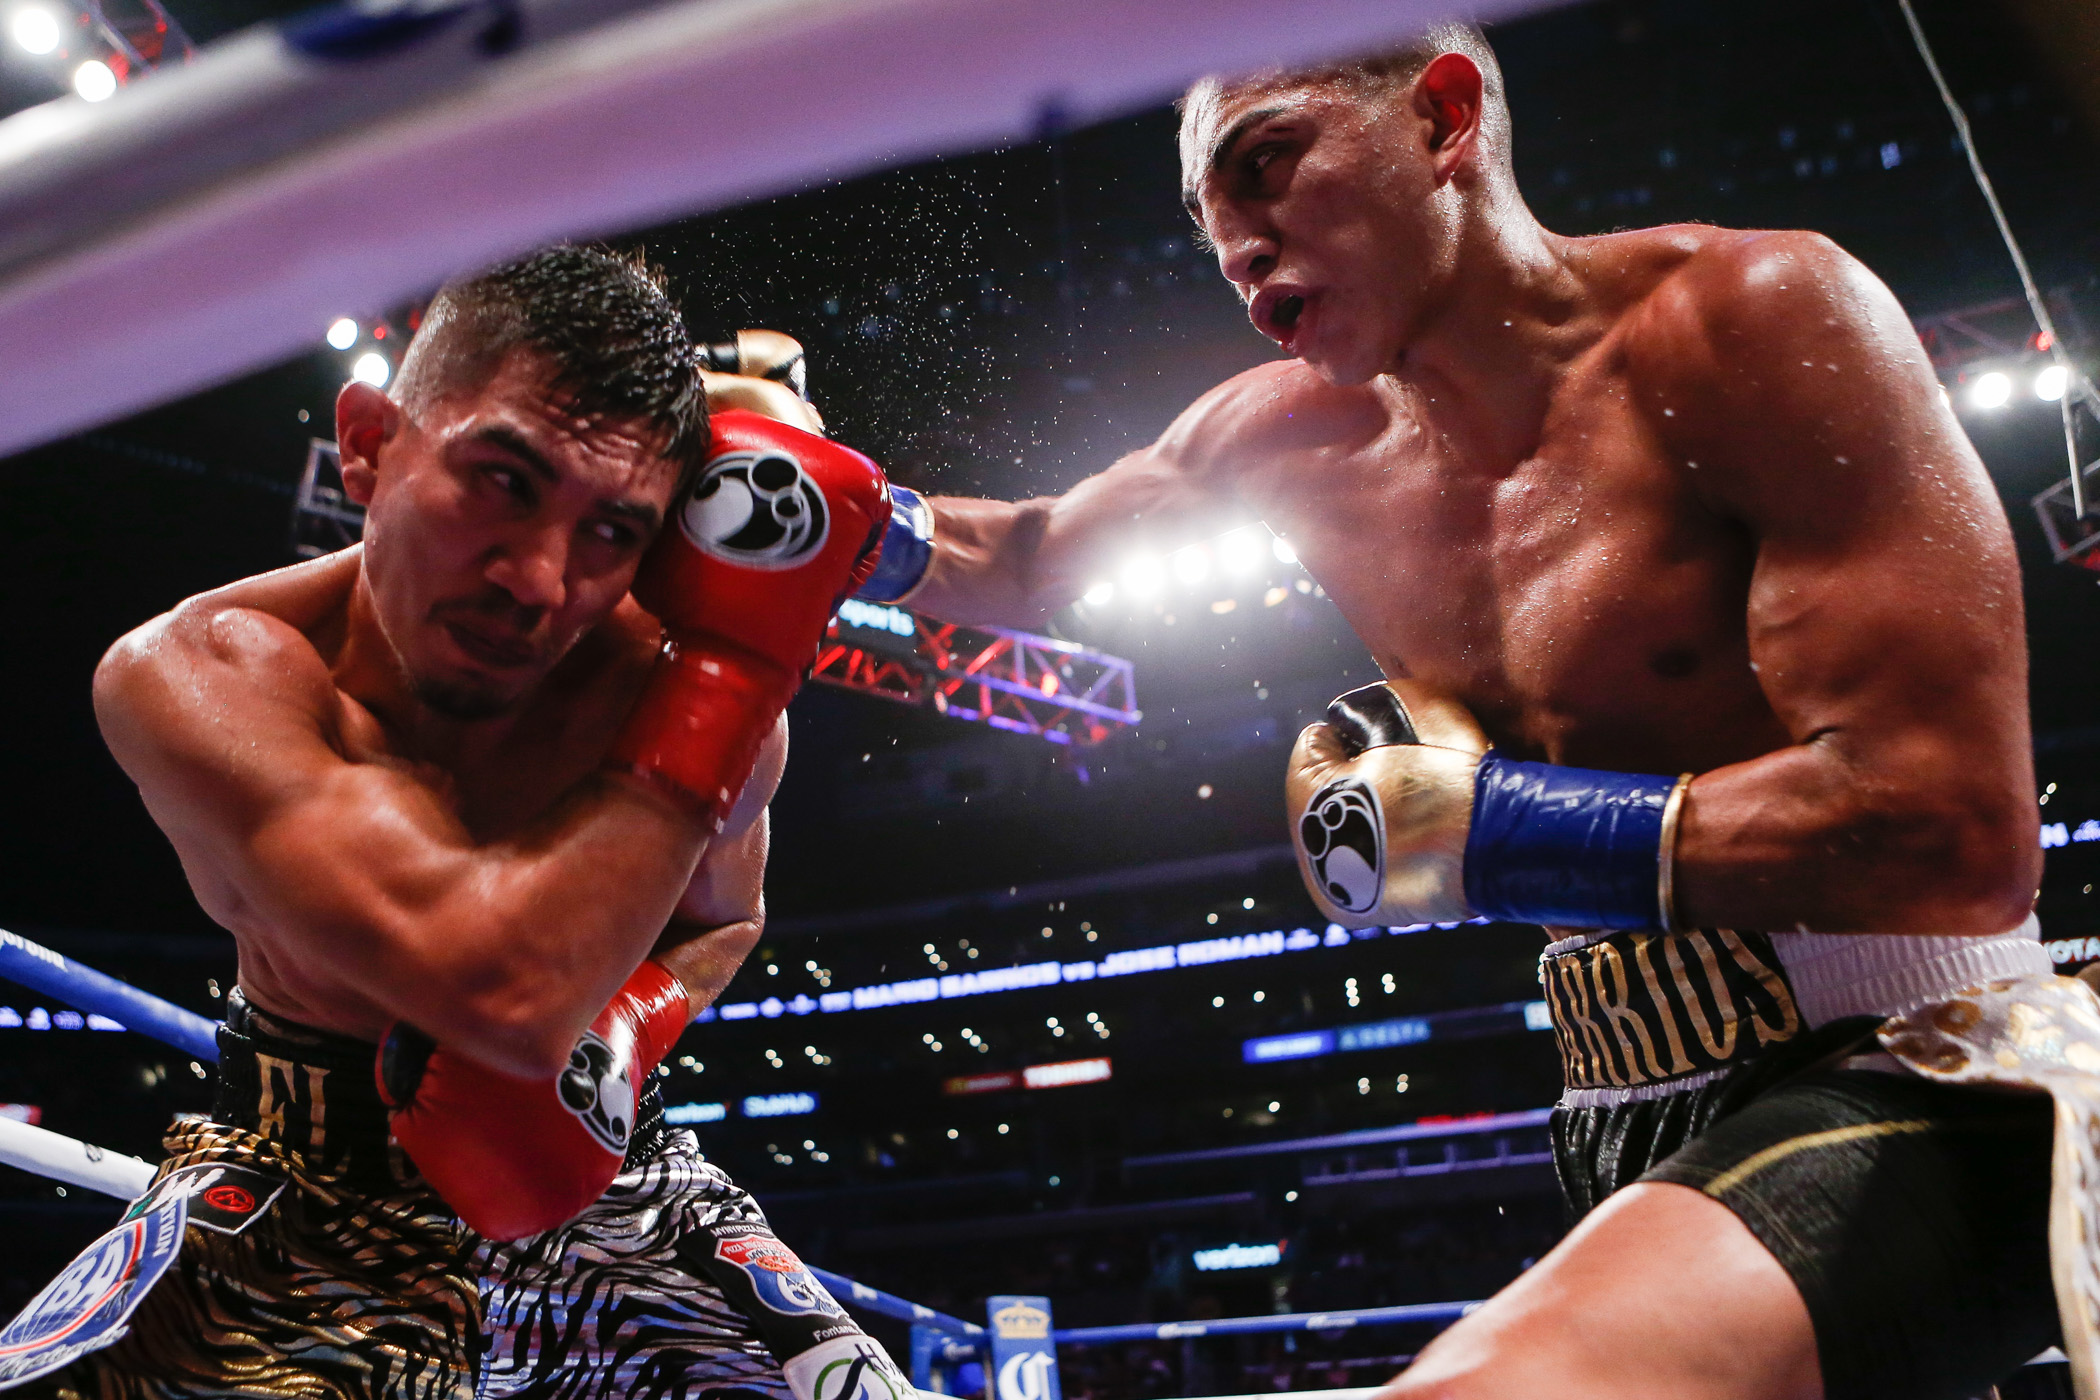 Welterweight Mario Barrios (right) vs. Jose Roman. Photo by Showtime